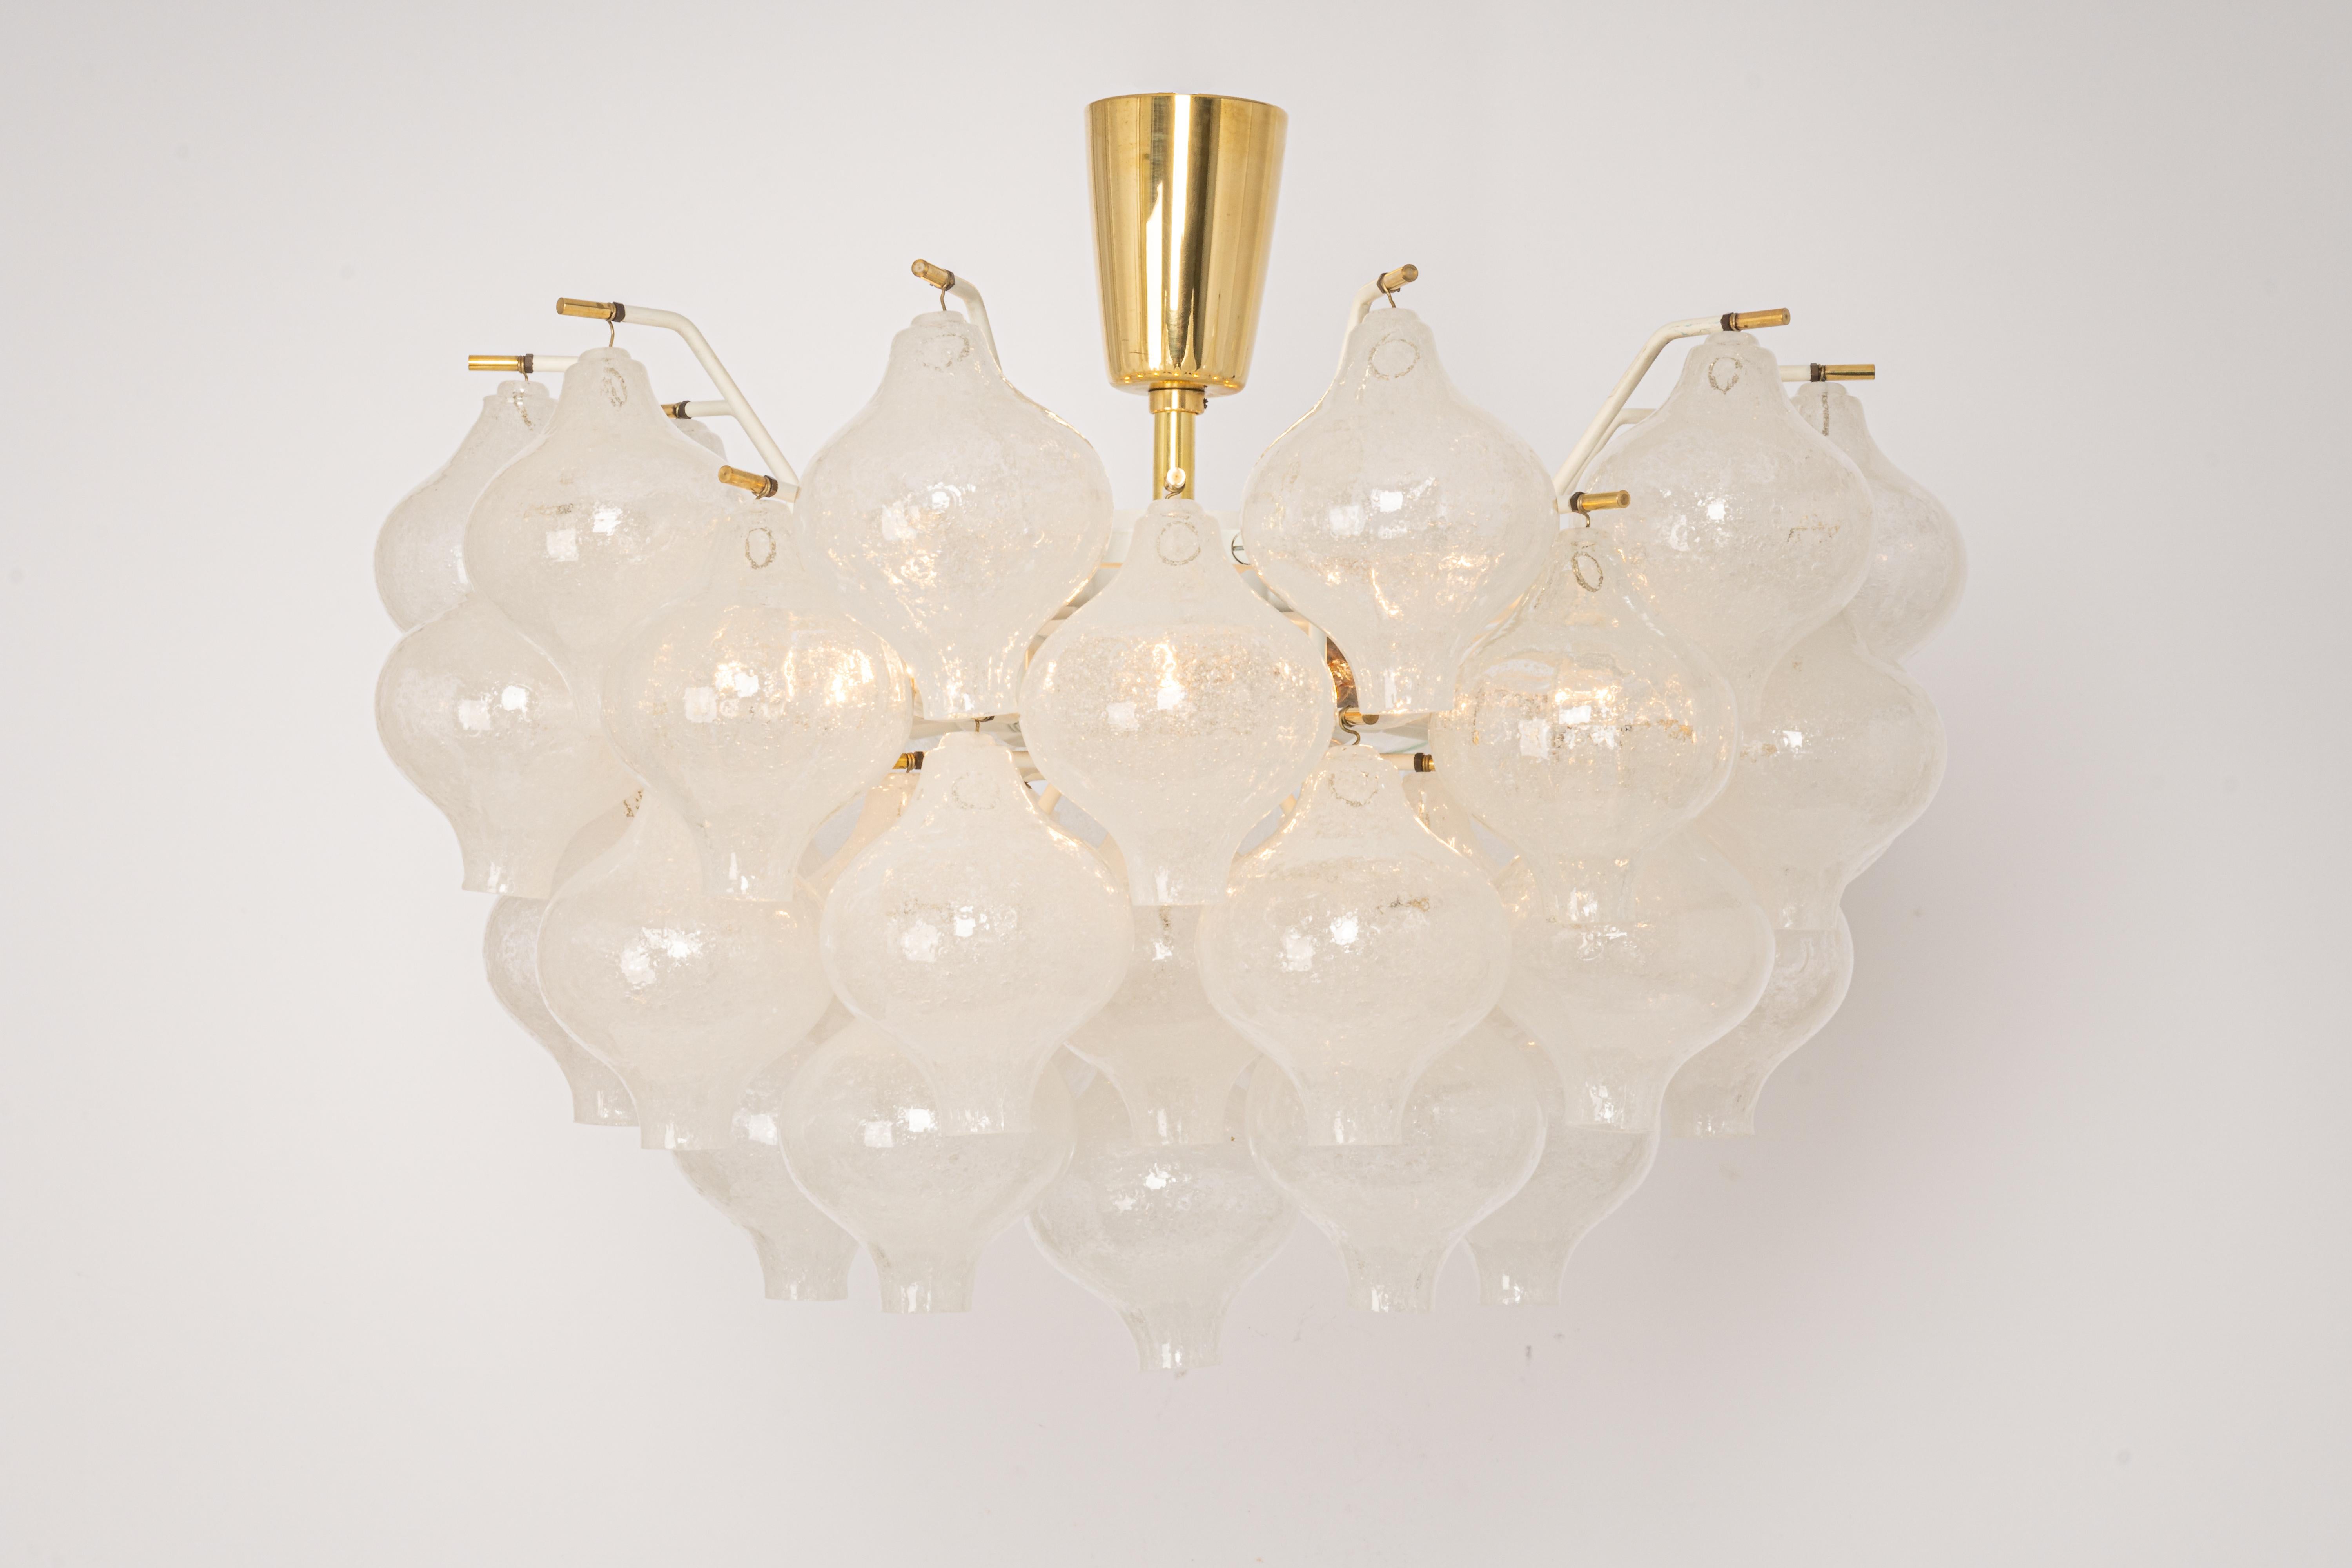 Wonderful onion-shaped -Tulipan glass chandelier or flush mount. A large number of hand-blown glasses are suspended on a white-painted metal frame and brass center rod.
Best of design from the 1960s by Kalmar, Austria. High quality of the